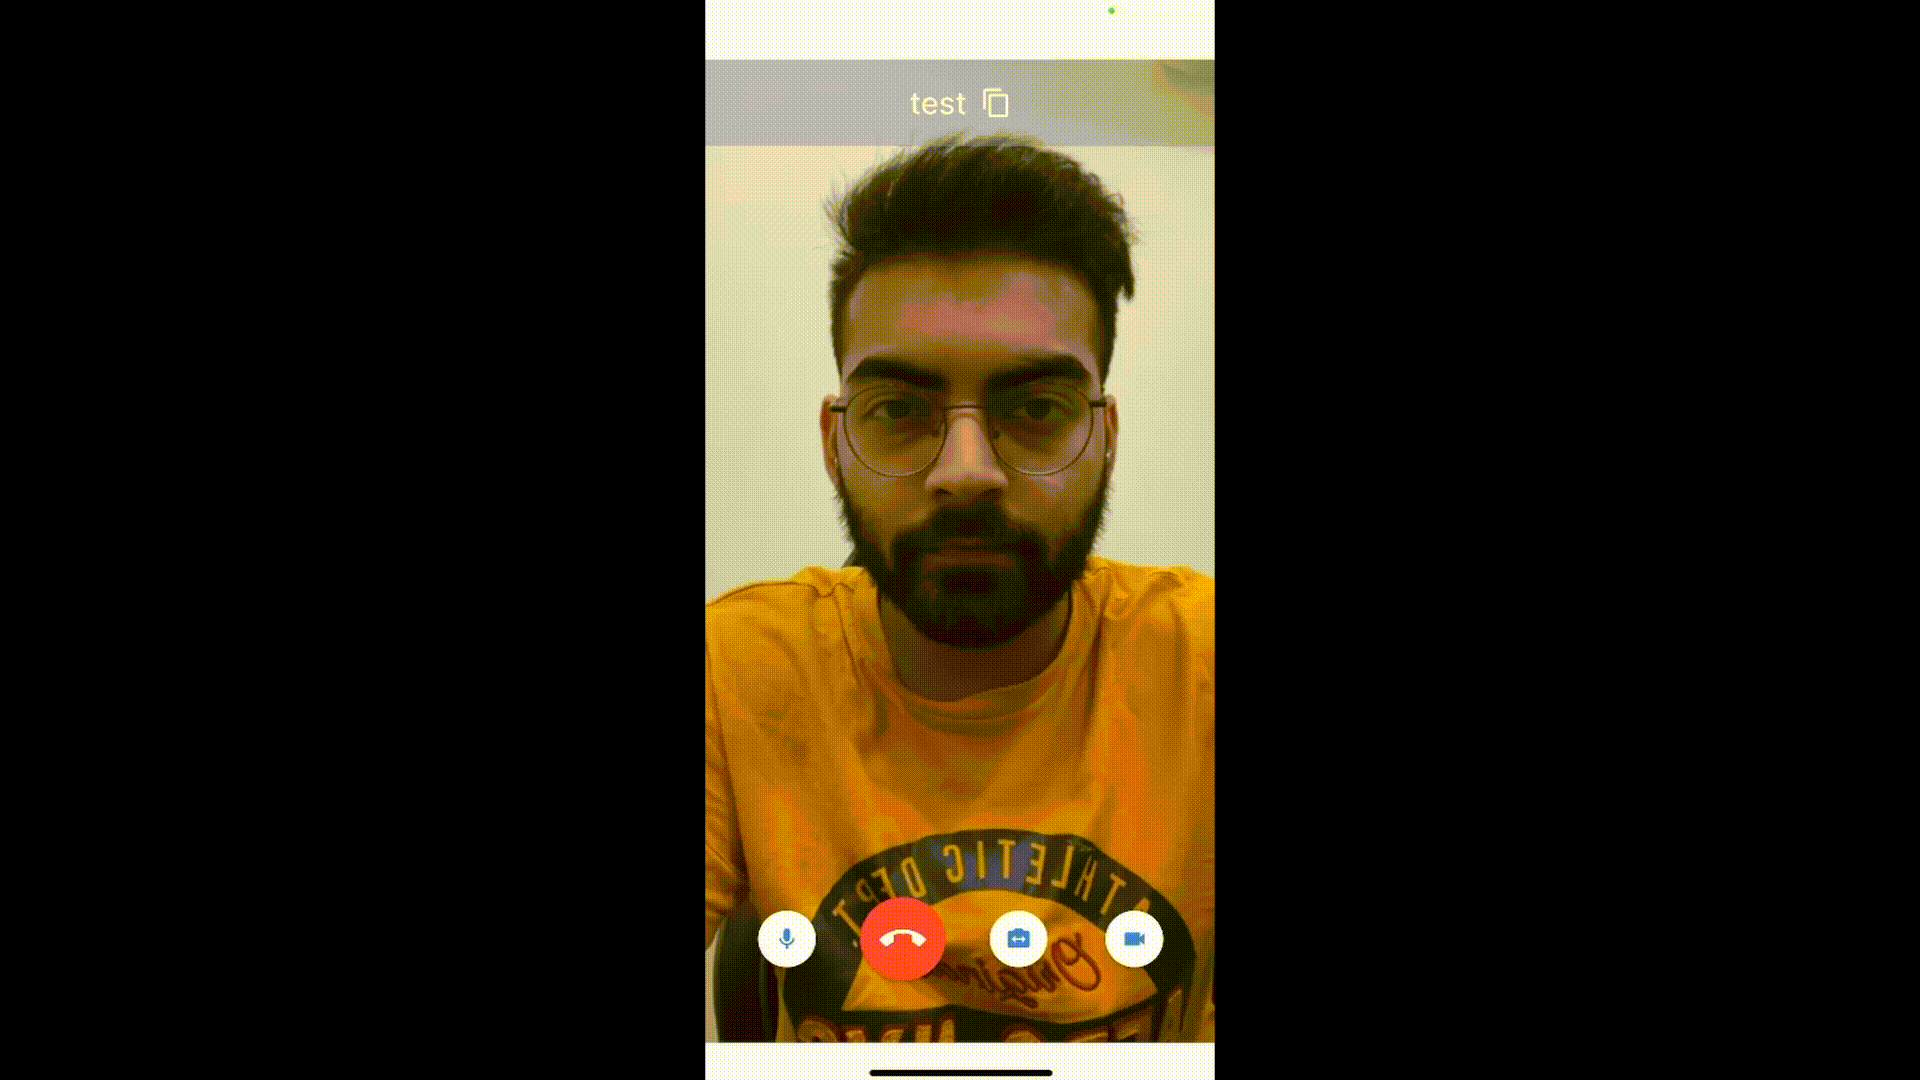 Adding Meeting URLs to your Agora Live Video Call using the Flutter UIKit 5